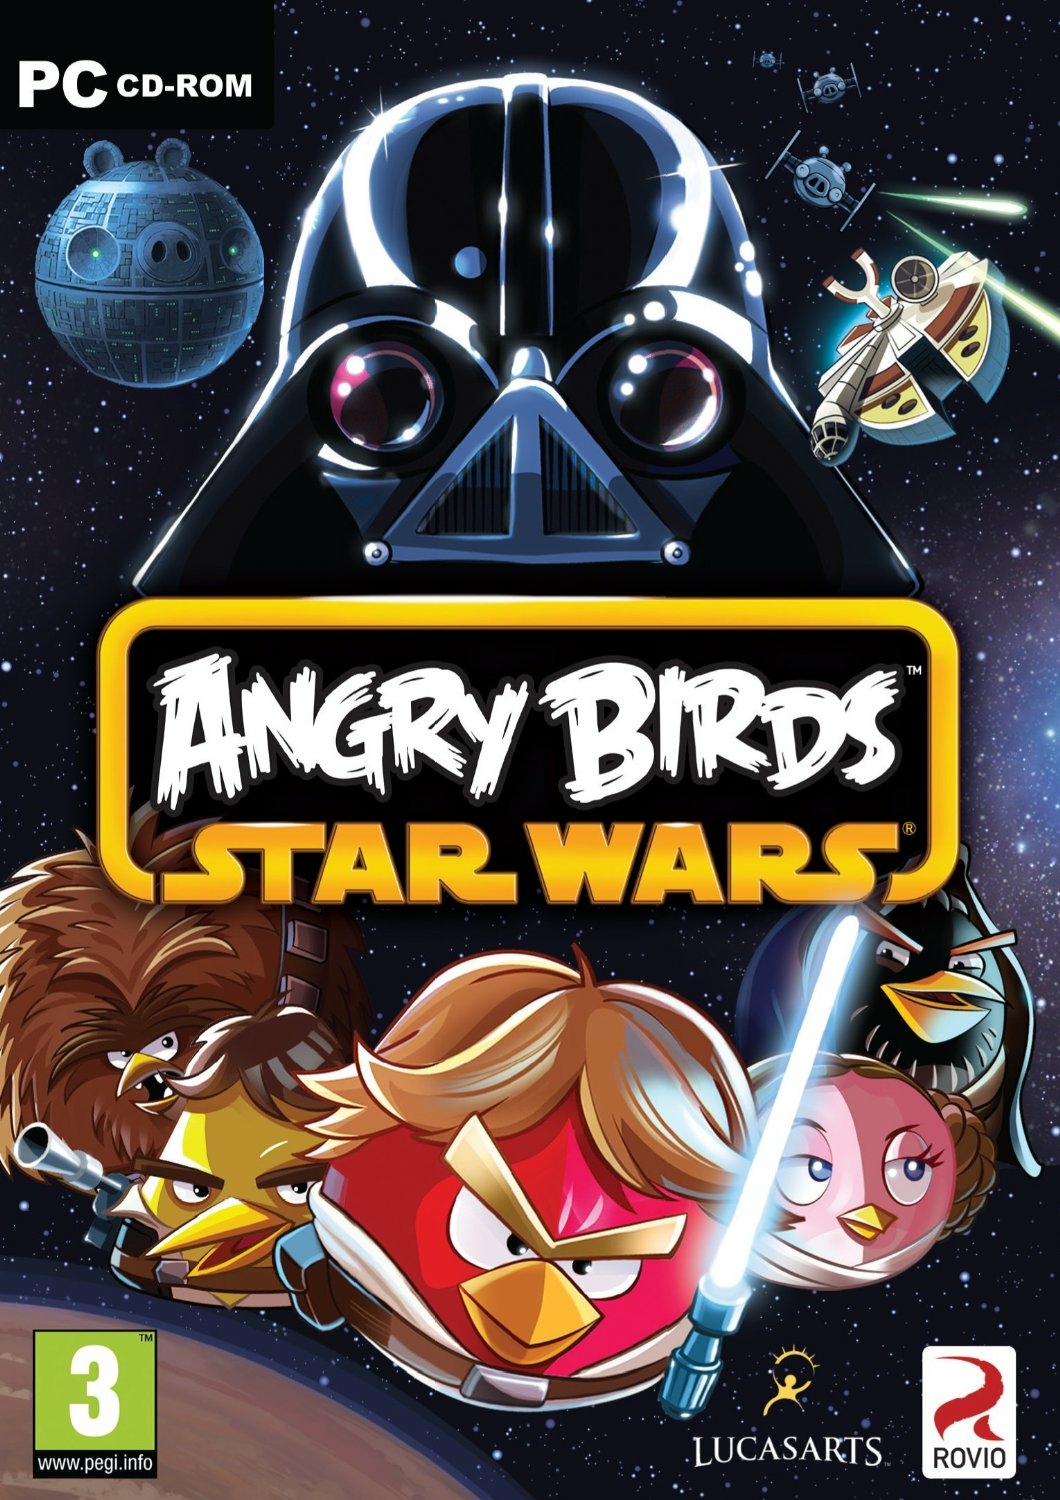 angry birds star wars pc download